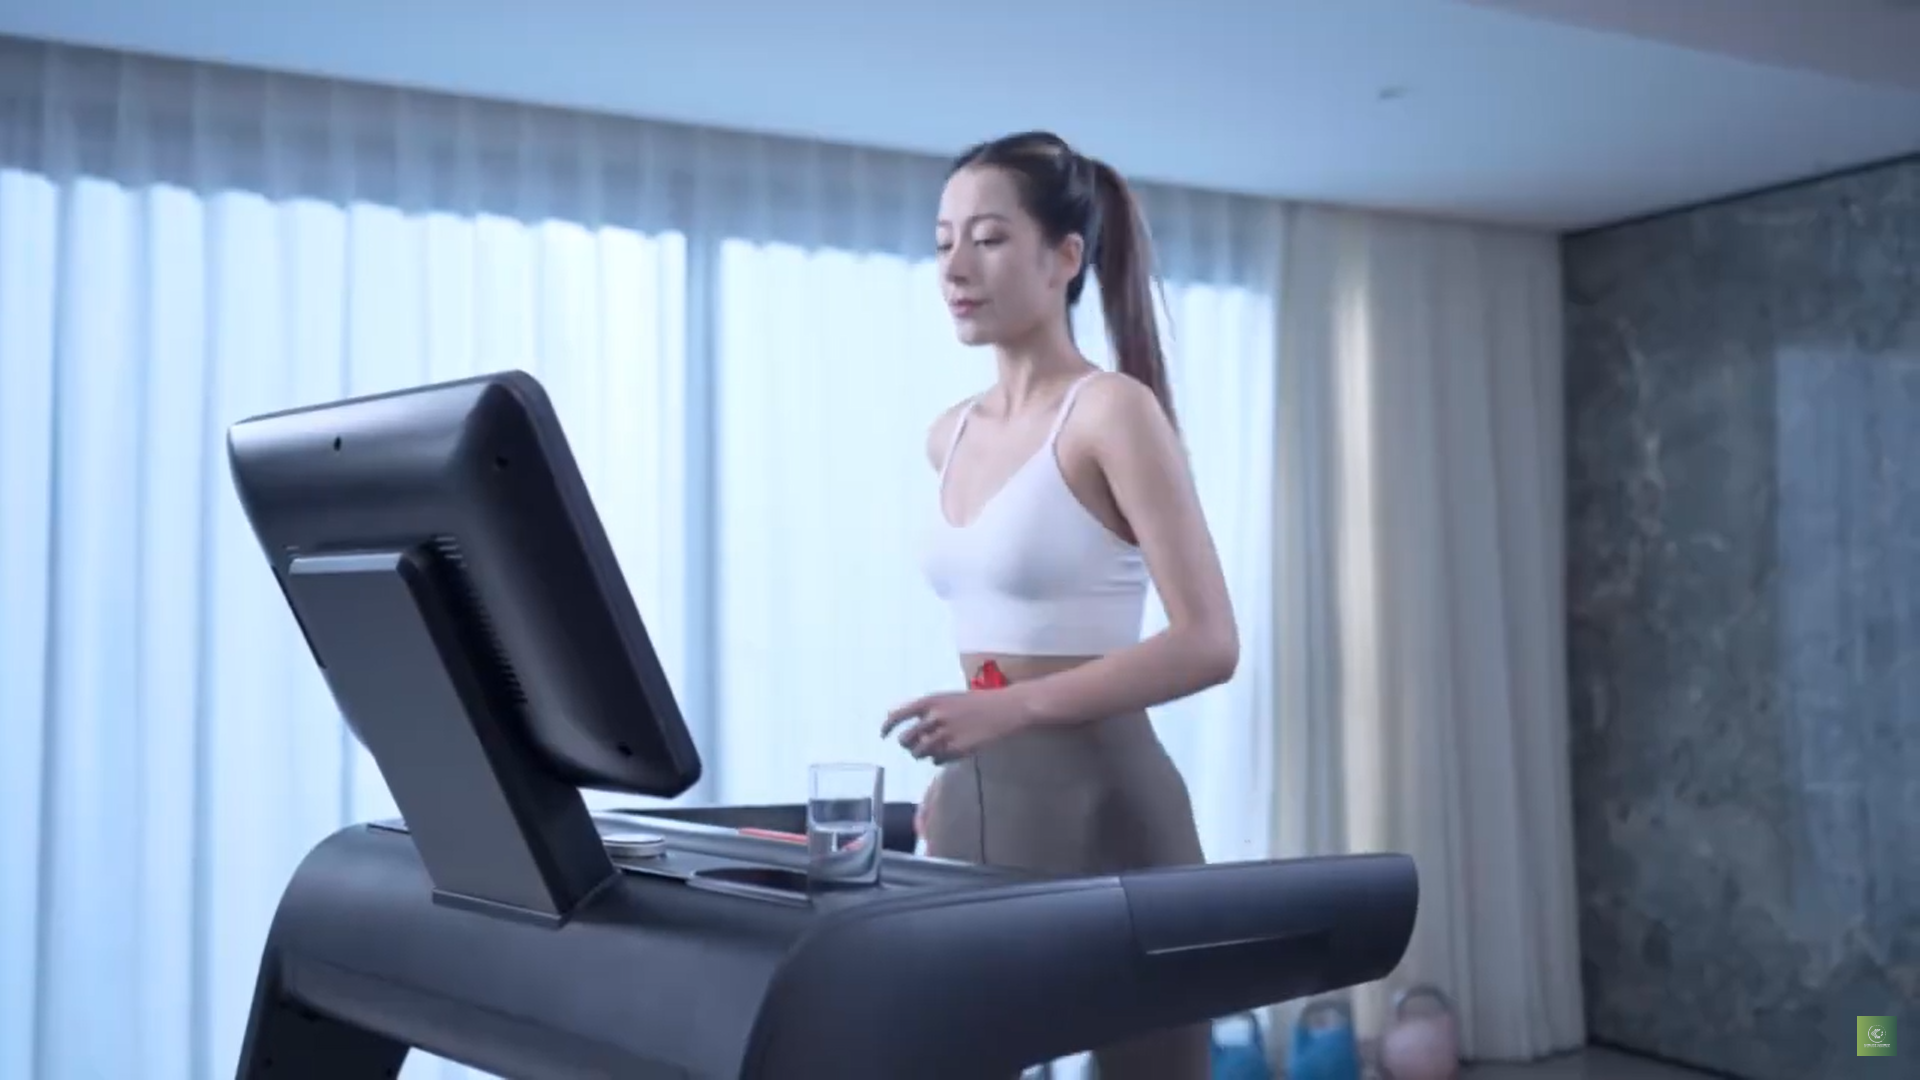 Impulse Fitness FGT300 Treadmill Commercial, by GG Health And Sport Ltd.